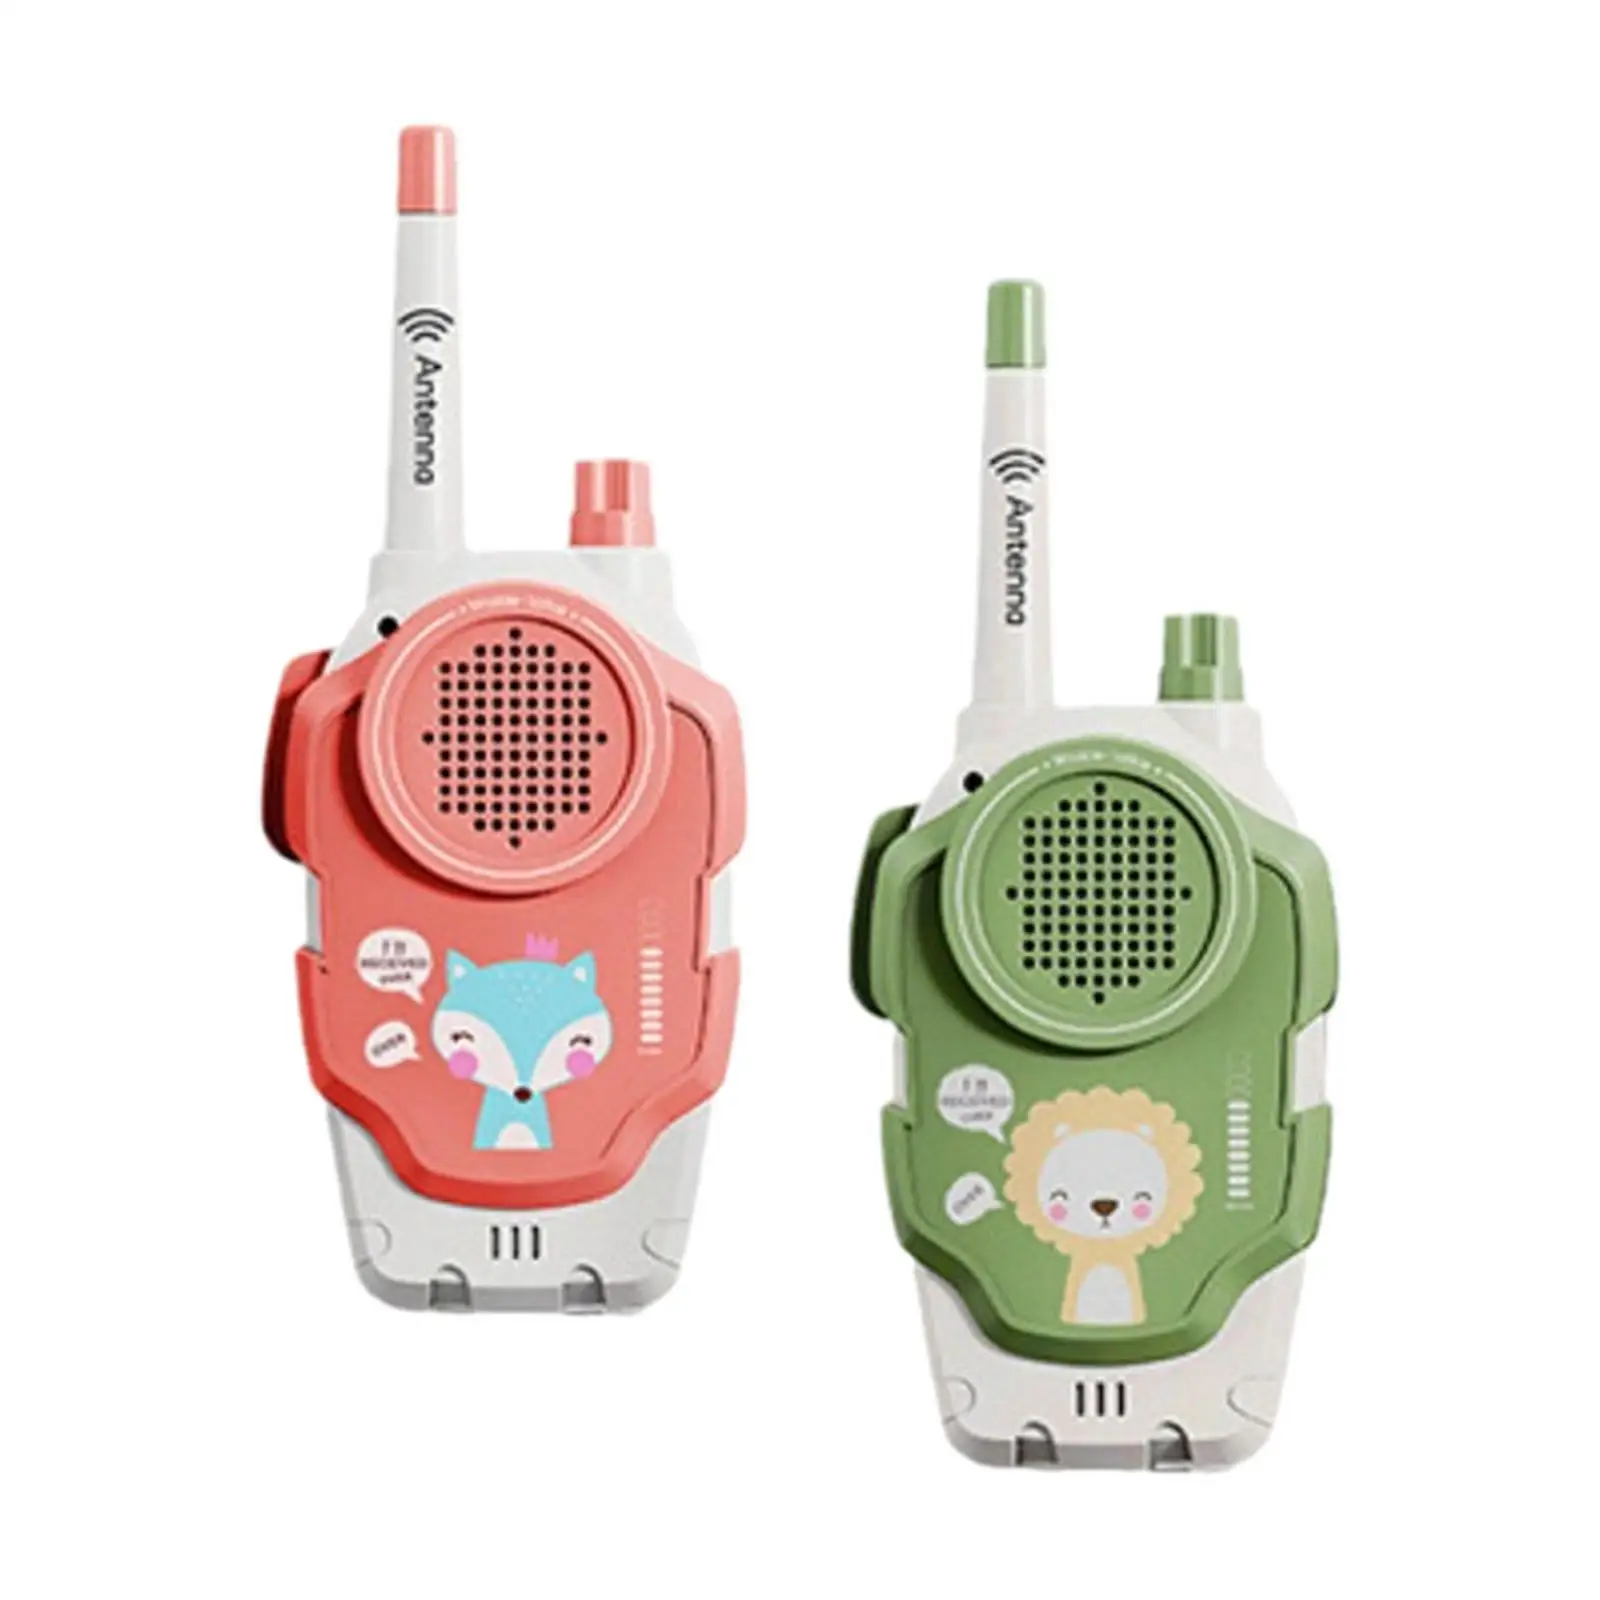 2 Pieces Children Toy Electronic Christmas Gifts Gadgets for 3 Years Old Kids Child Boys Girls Toddlers